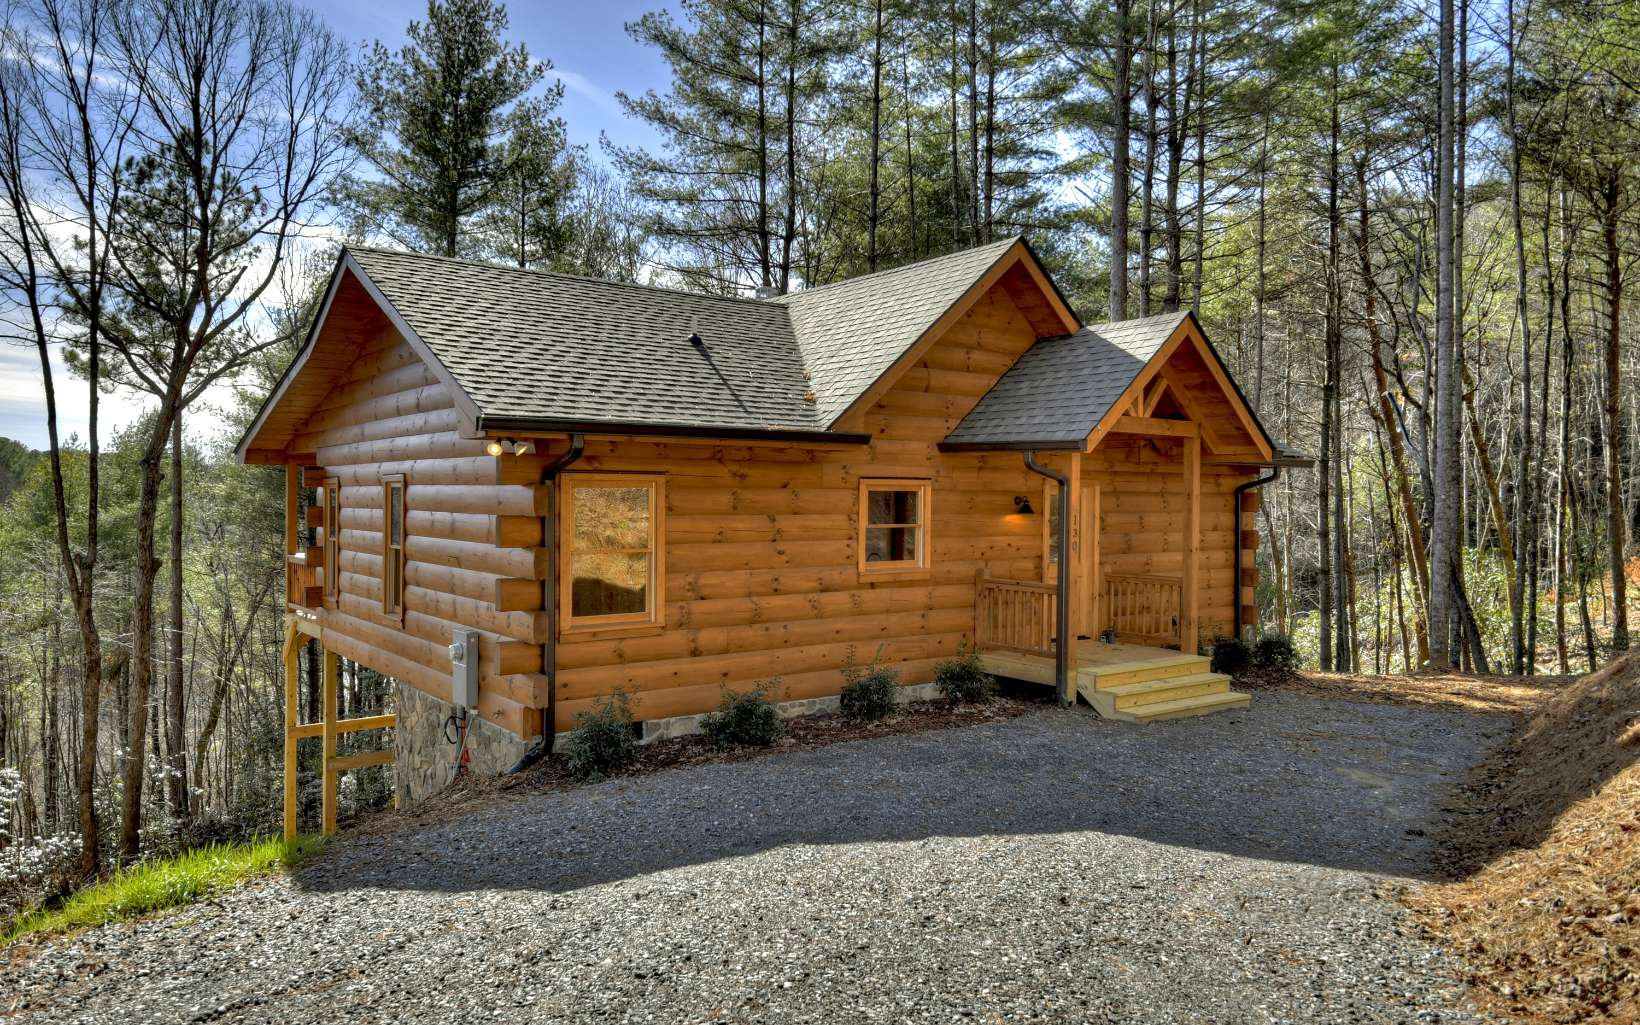 2x2x2: 2 bedrooms, 2 bathrooms, and "2" cute! Whether you’re considering part or full-time living, this majestic charmer allows you to escape the cares of the world. You'll delight in taking the scenic route with mesmerizing views of farmlands, mountain, ponds, & creeks, and upon arrival, you’ll be greeted by a lovely ridgeline view of your own! This location offers easy all paved access to everything you desire in North Georgia, as it is conveniently situated between Ellijay and Blue Ridge. Other highlights of this warm & inviting haven include: open floorplan with one level living, soaring ceilings emphasized by natural light & exposed beams, floor-to-ceiling stacked stone fireplace, hardwoods & rustic accents throughout, easy to maintain landscaping, and a spacious lot for room to roam complete with Lake Whitepath frontage. Are you ready to make those mountain memories?